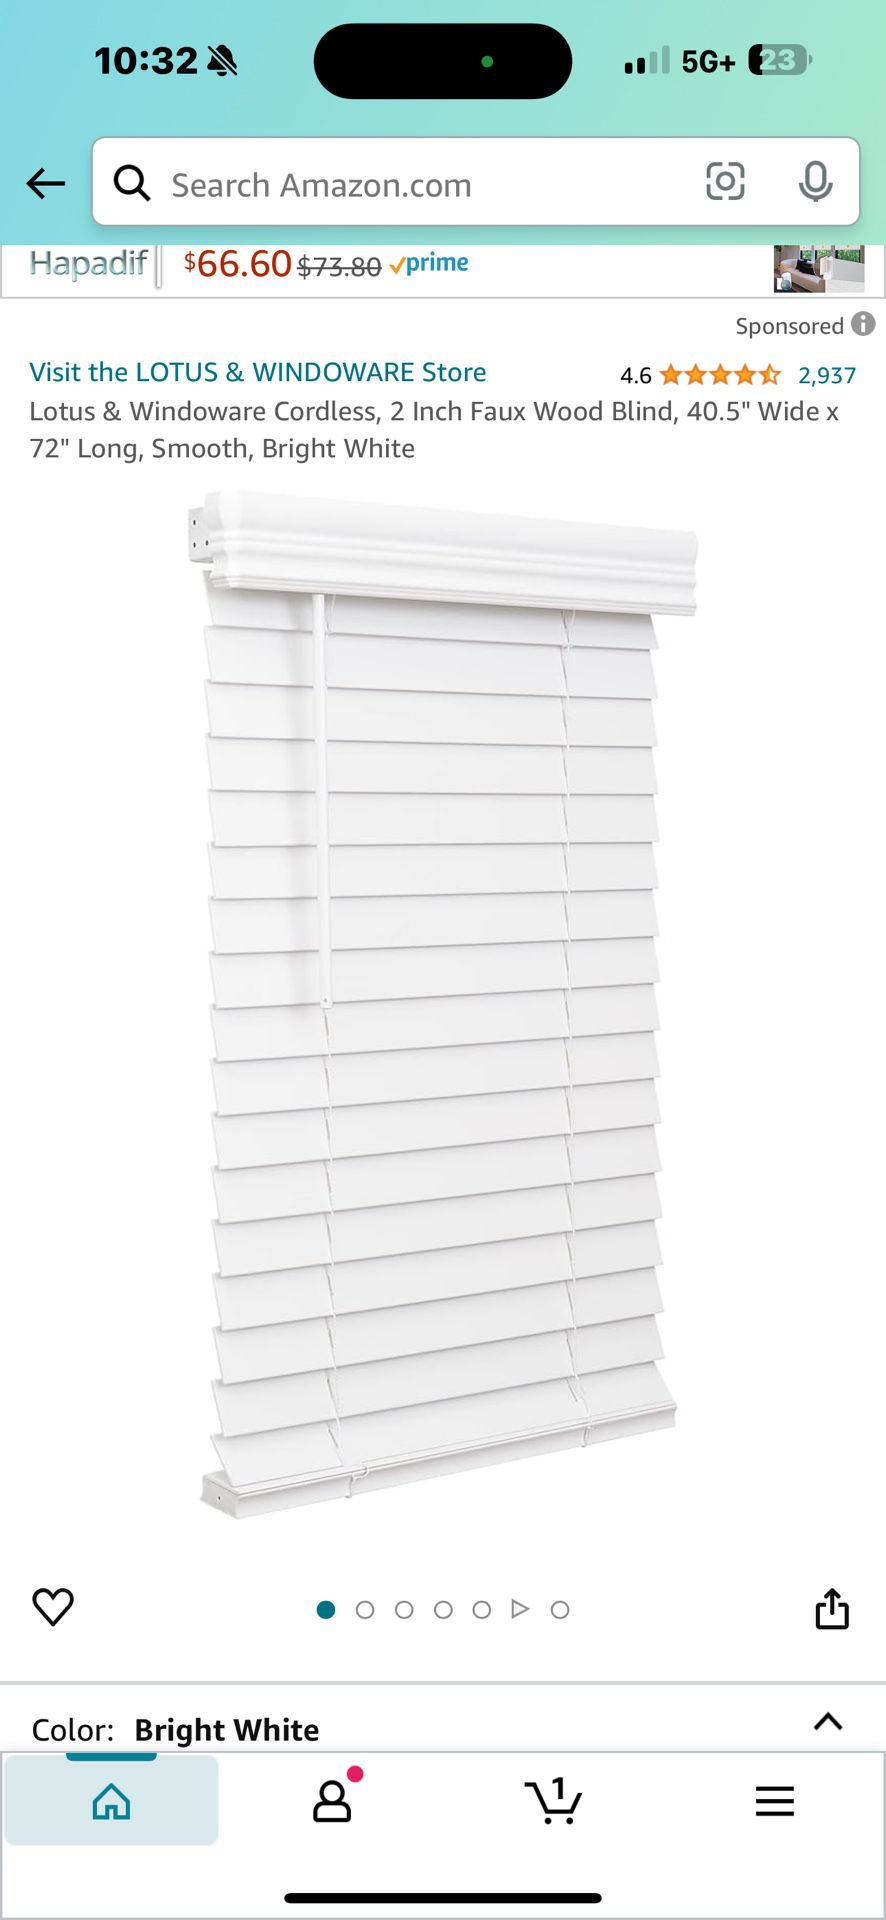 Lotus & Windoware Cordless, 2 Inch Faux Wood Blind, 40.5" Wide x 72" Long, Smooth, Bright White